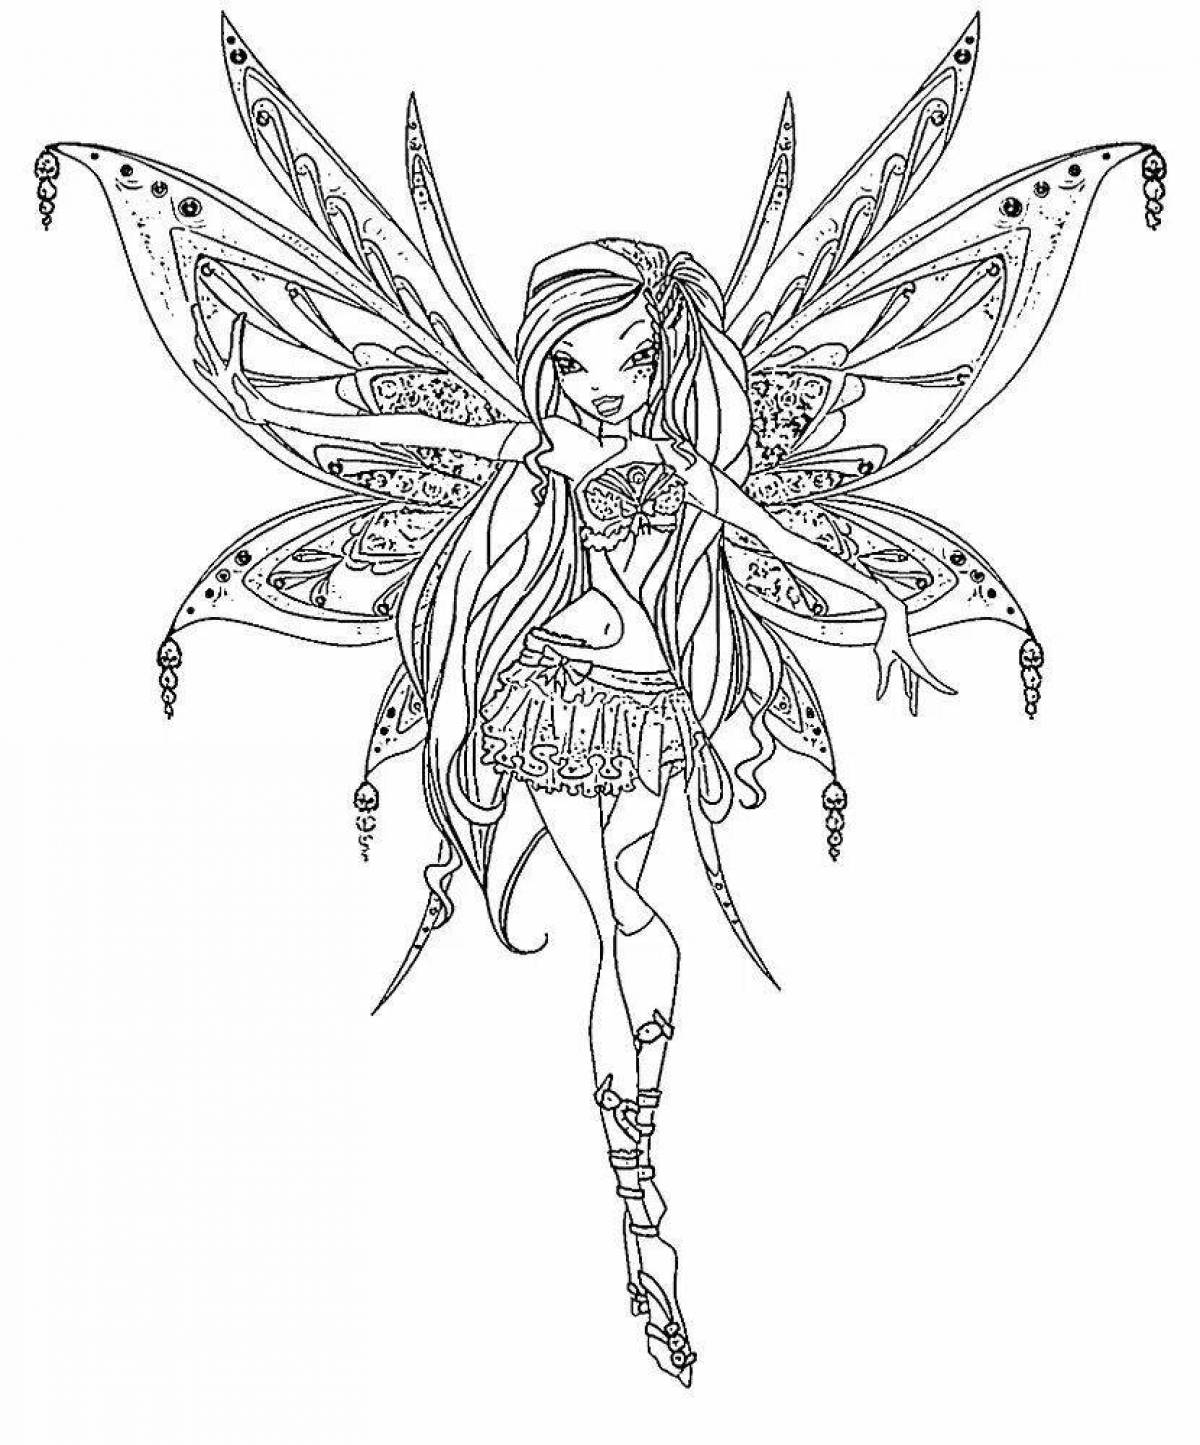 Cute winx fairy coloring book for kids